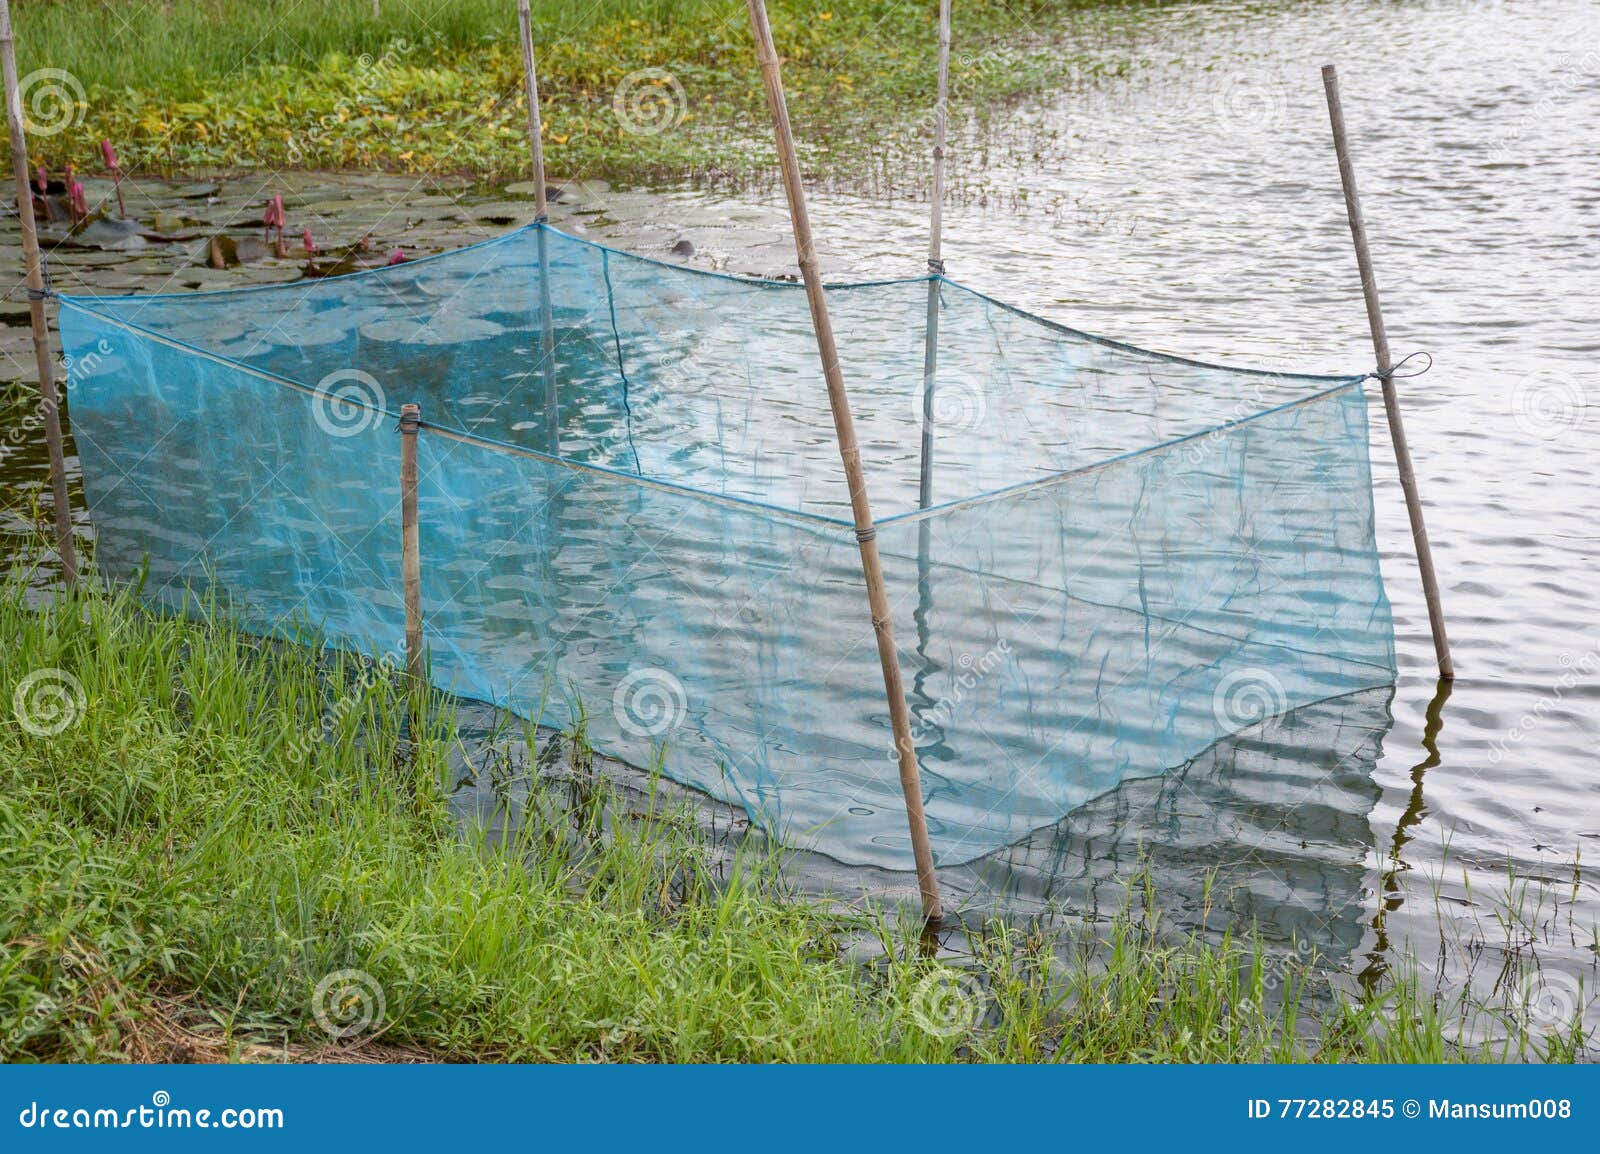 Blue net stock image. Image of outdoor, pond, blue, water - 77282845